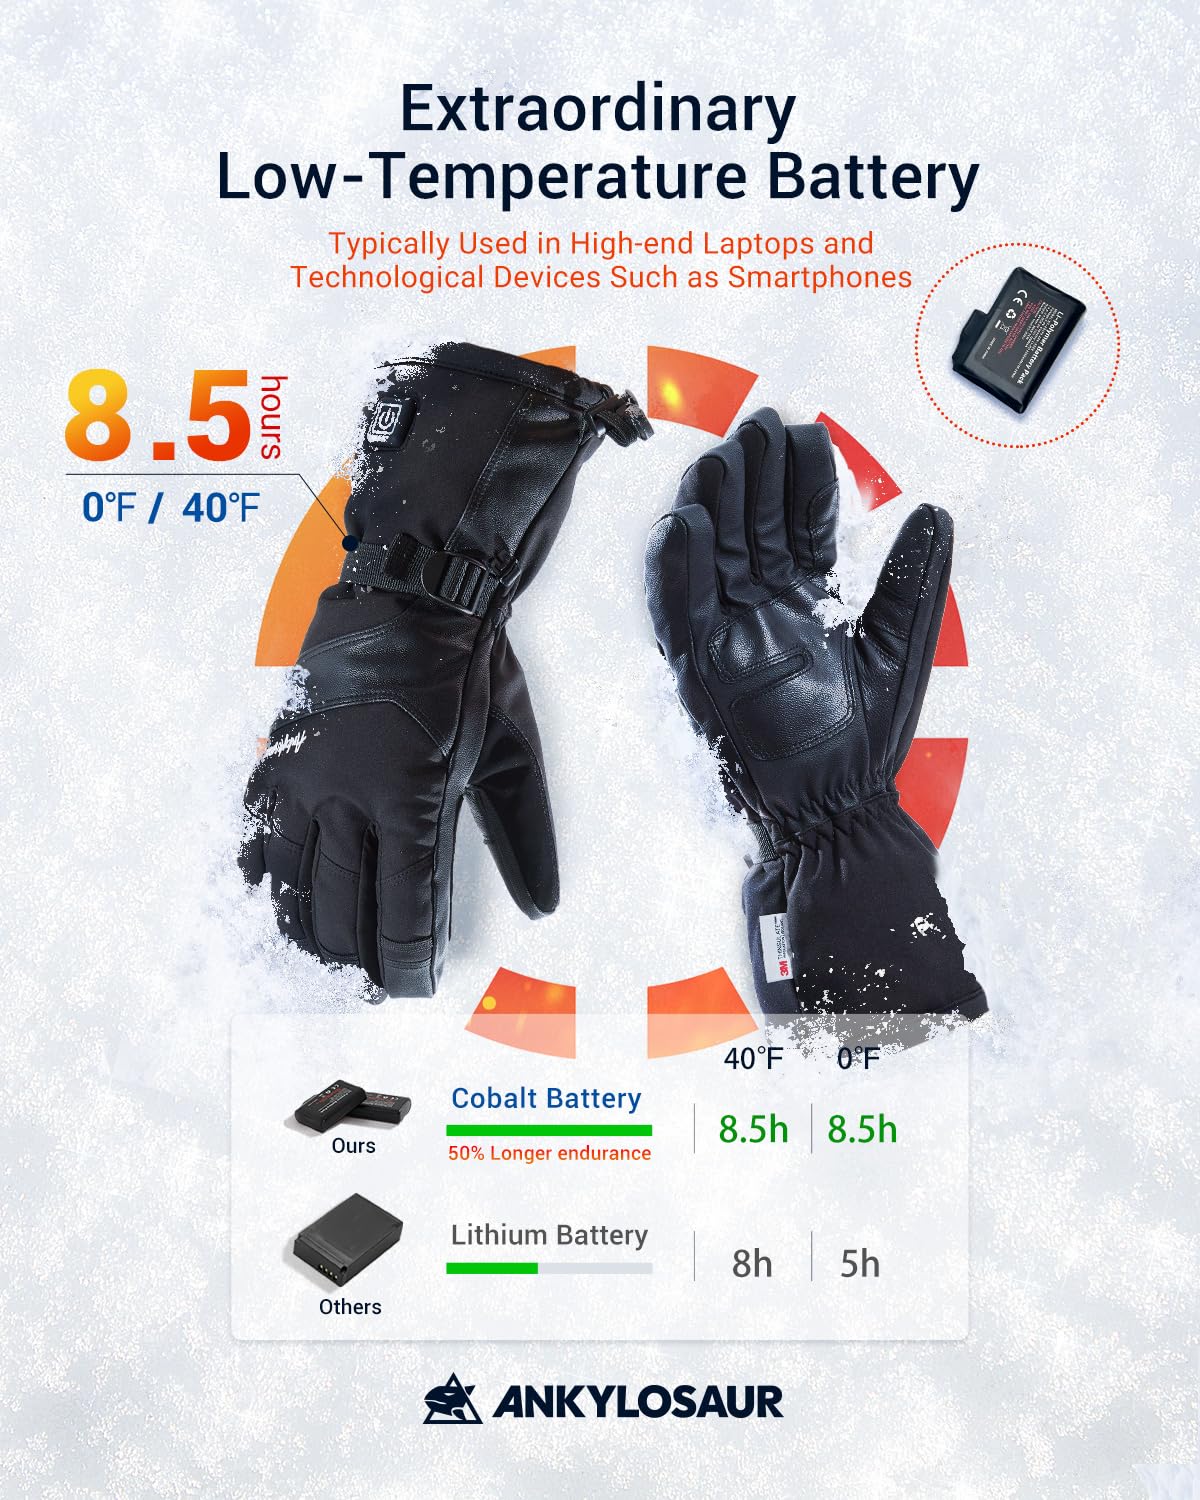 ANKLOSAUR Heated Gloves for Men and Women,Upgraded Thermal Materials, Outdoor Indoor Hand Warmer Glove, Heated Gloves Touchscreen Waterproof, for Climbing Hiking Cycling Skiing Snowboarding